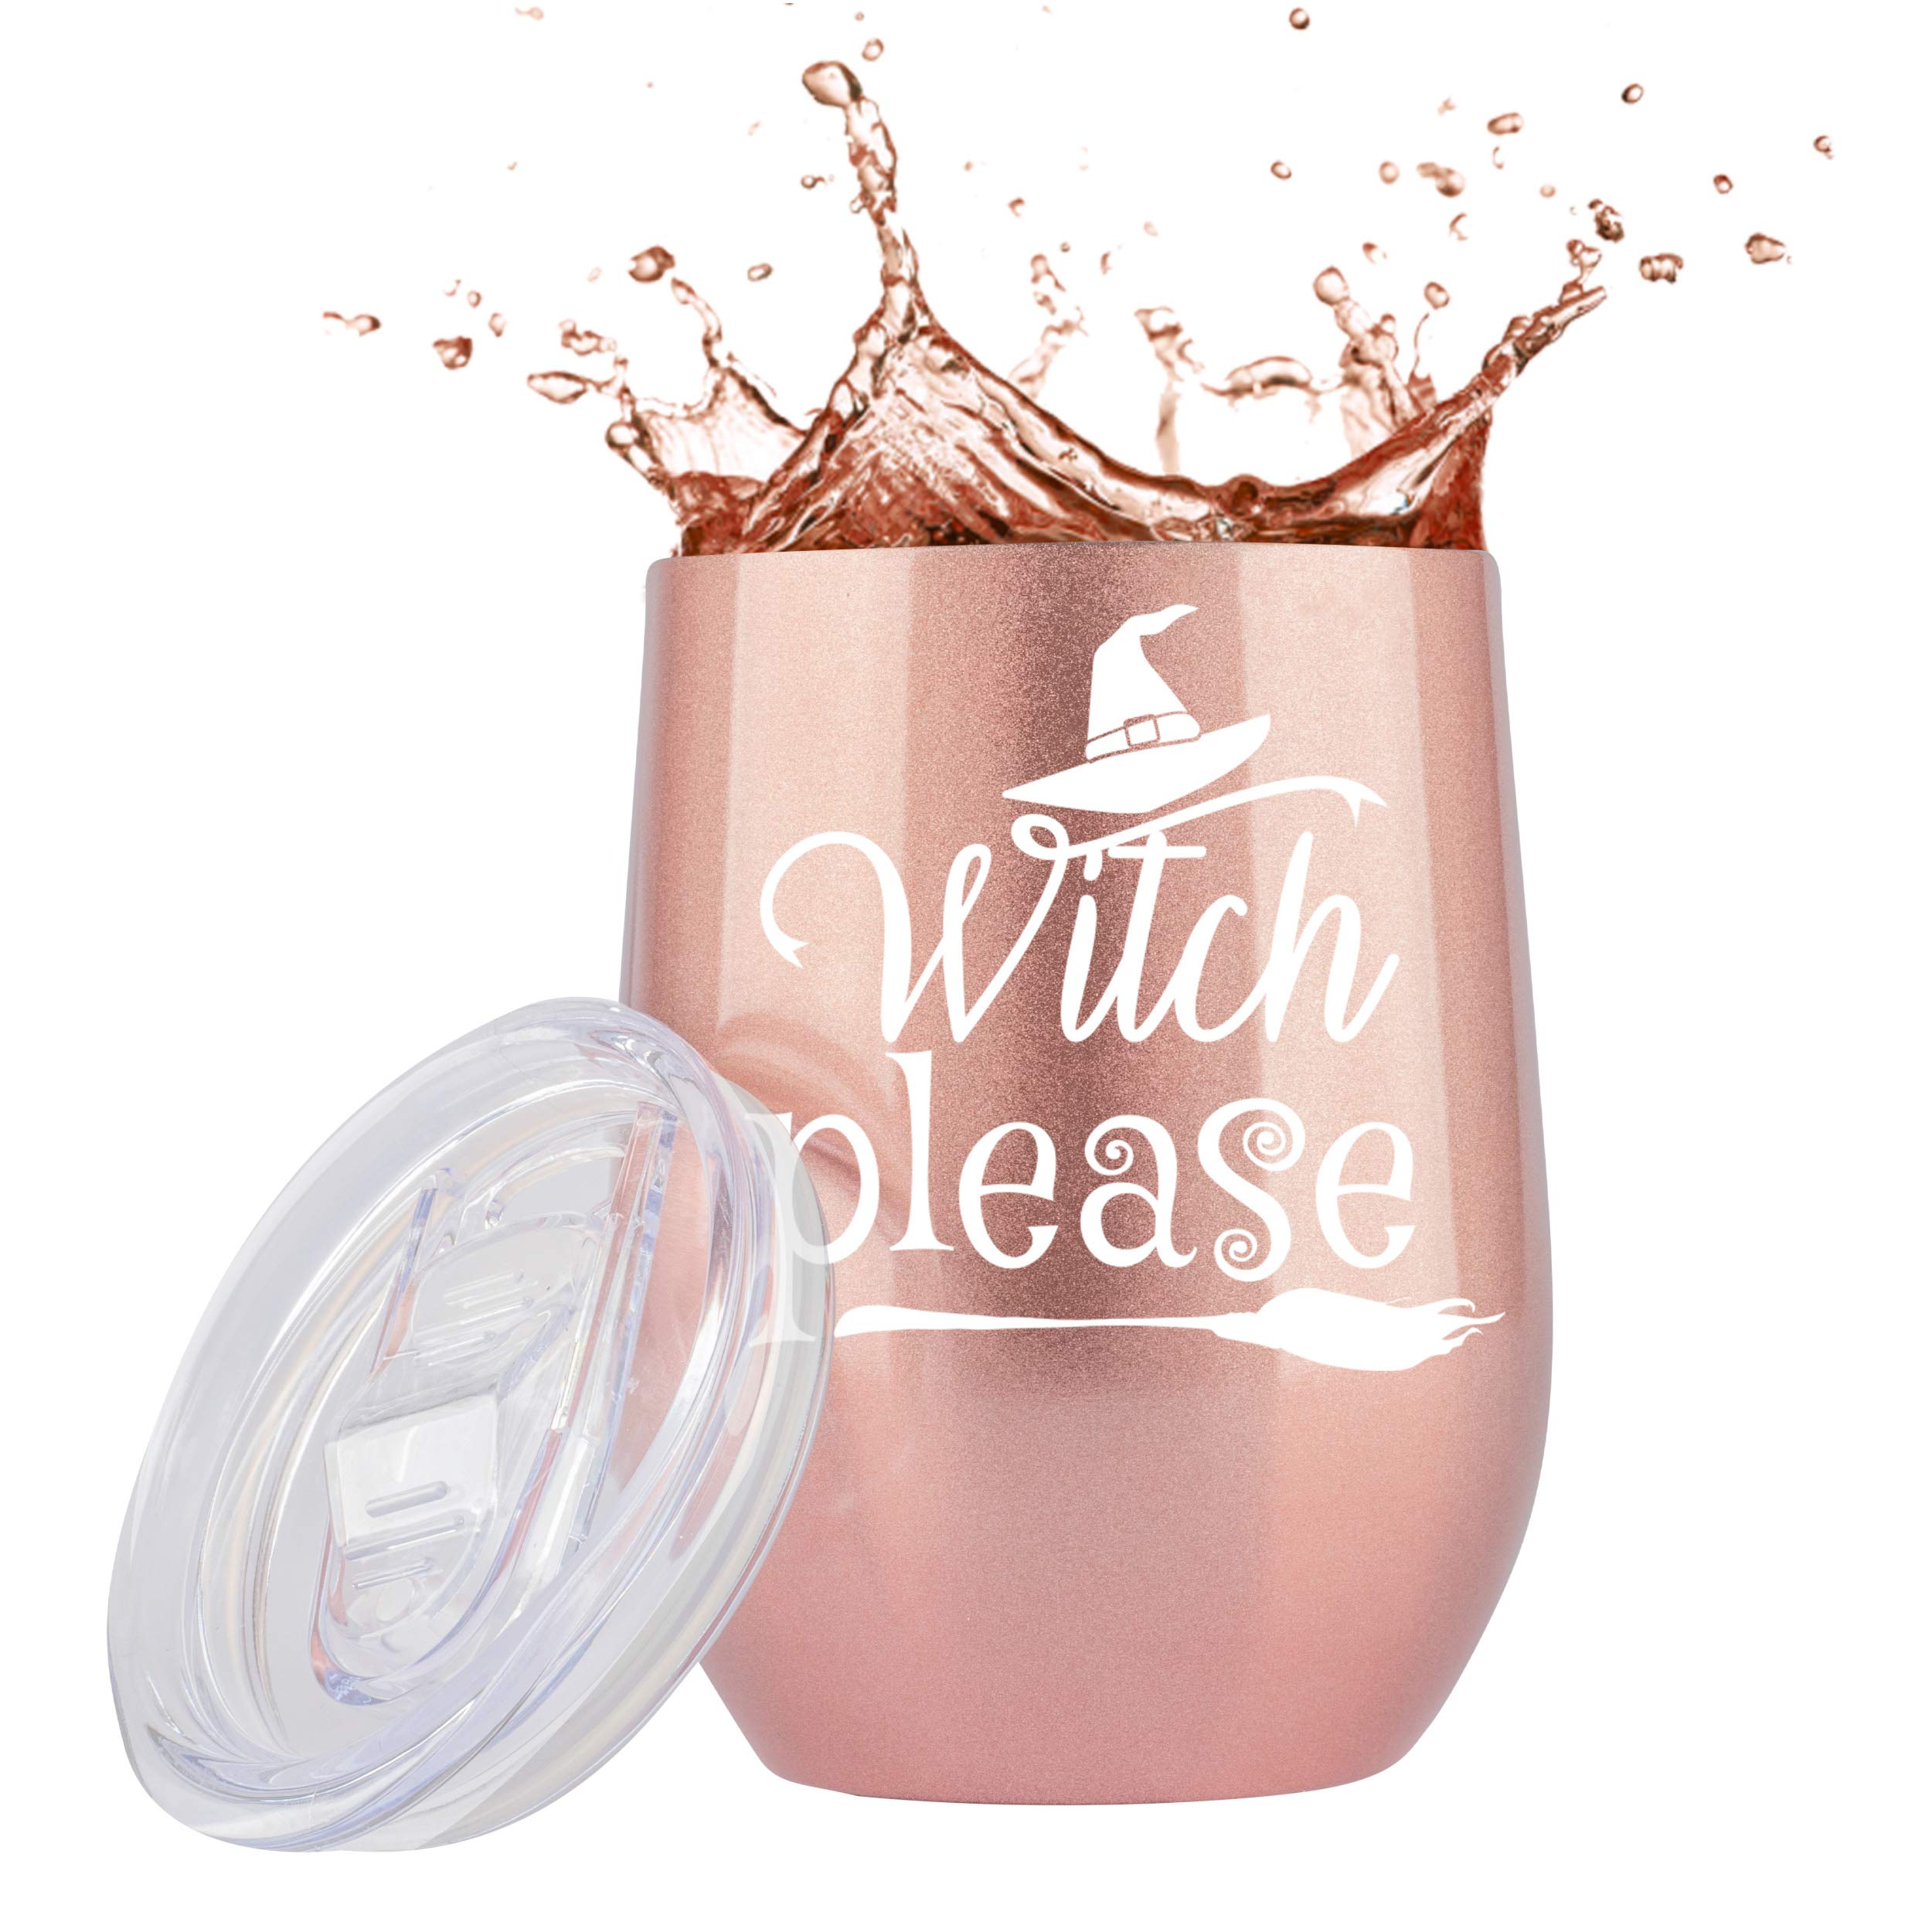 JENVIO Witchy Gifts - Rose Gold Stainless Steel Wine Tumbler/Mug with Lid and Straw - Witch Room Decor for Witchcraft Women Wicca Gothic Brew Village Glass Cup Please Broomstick Valentine's Day